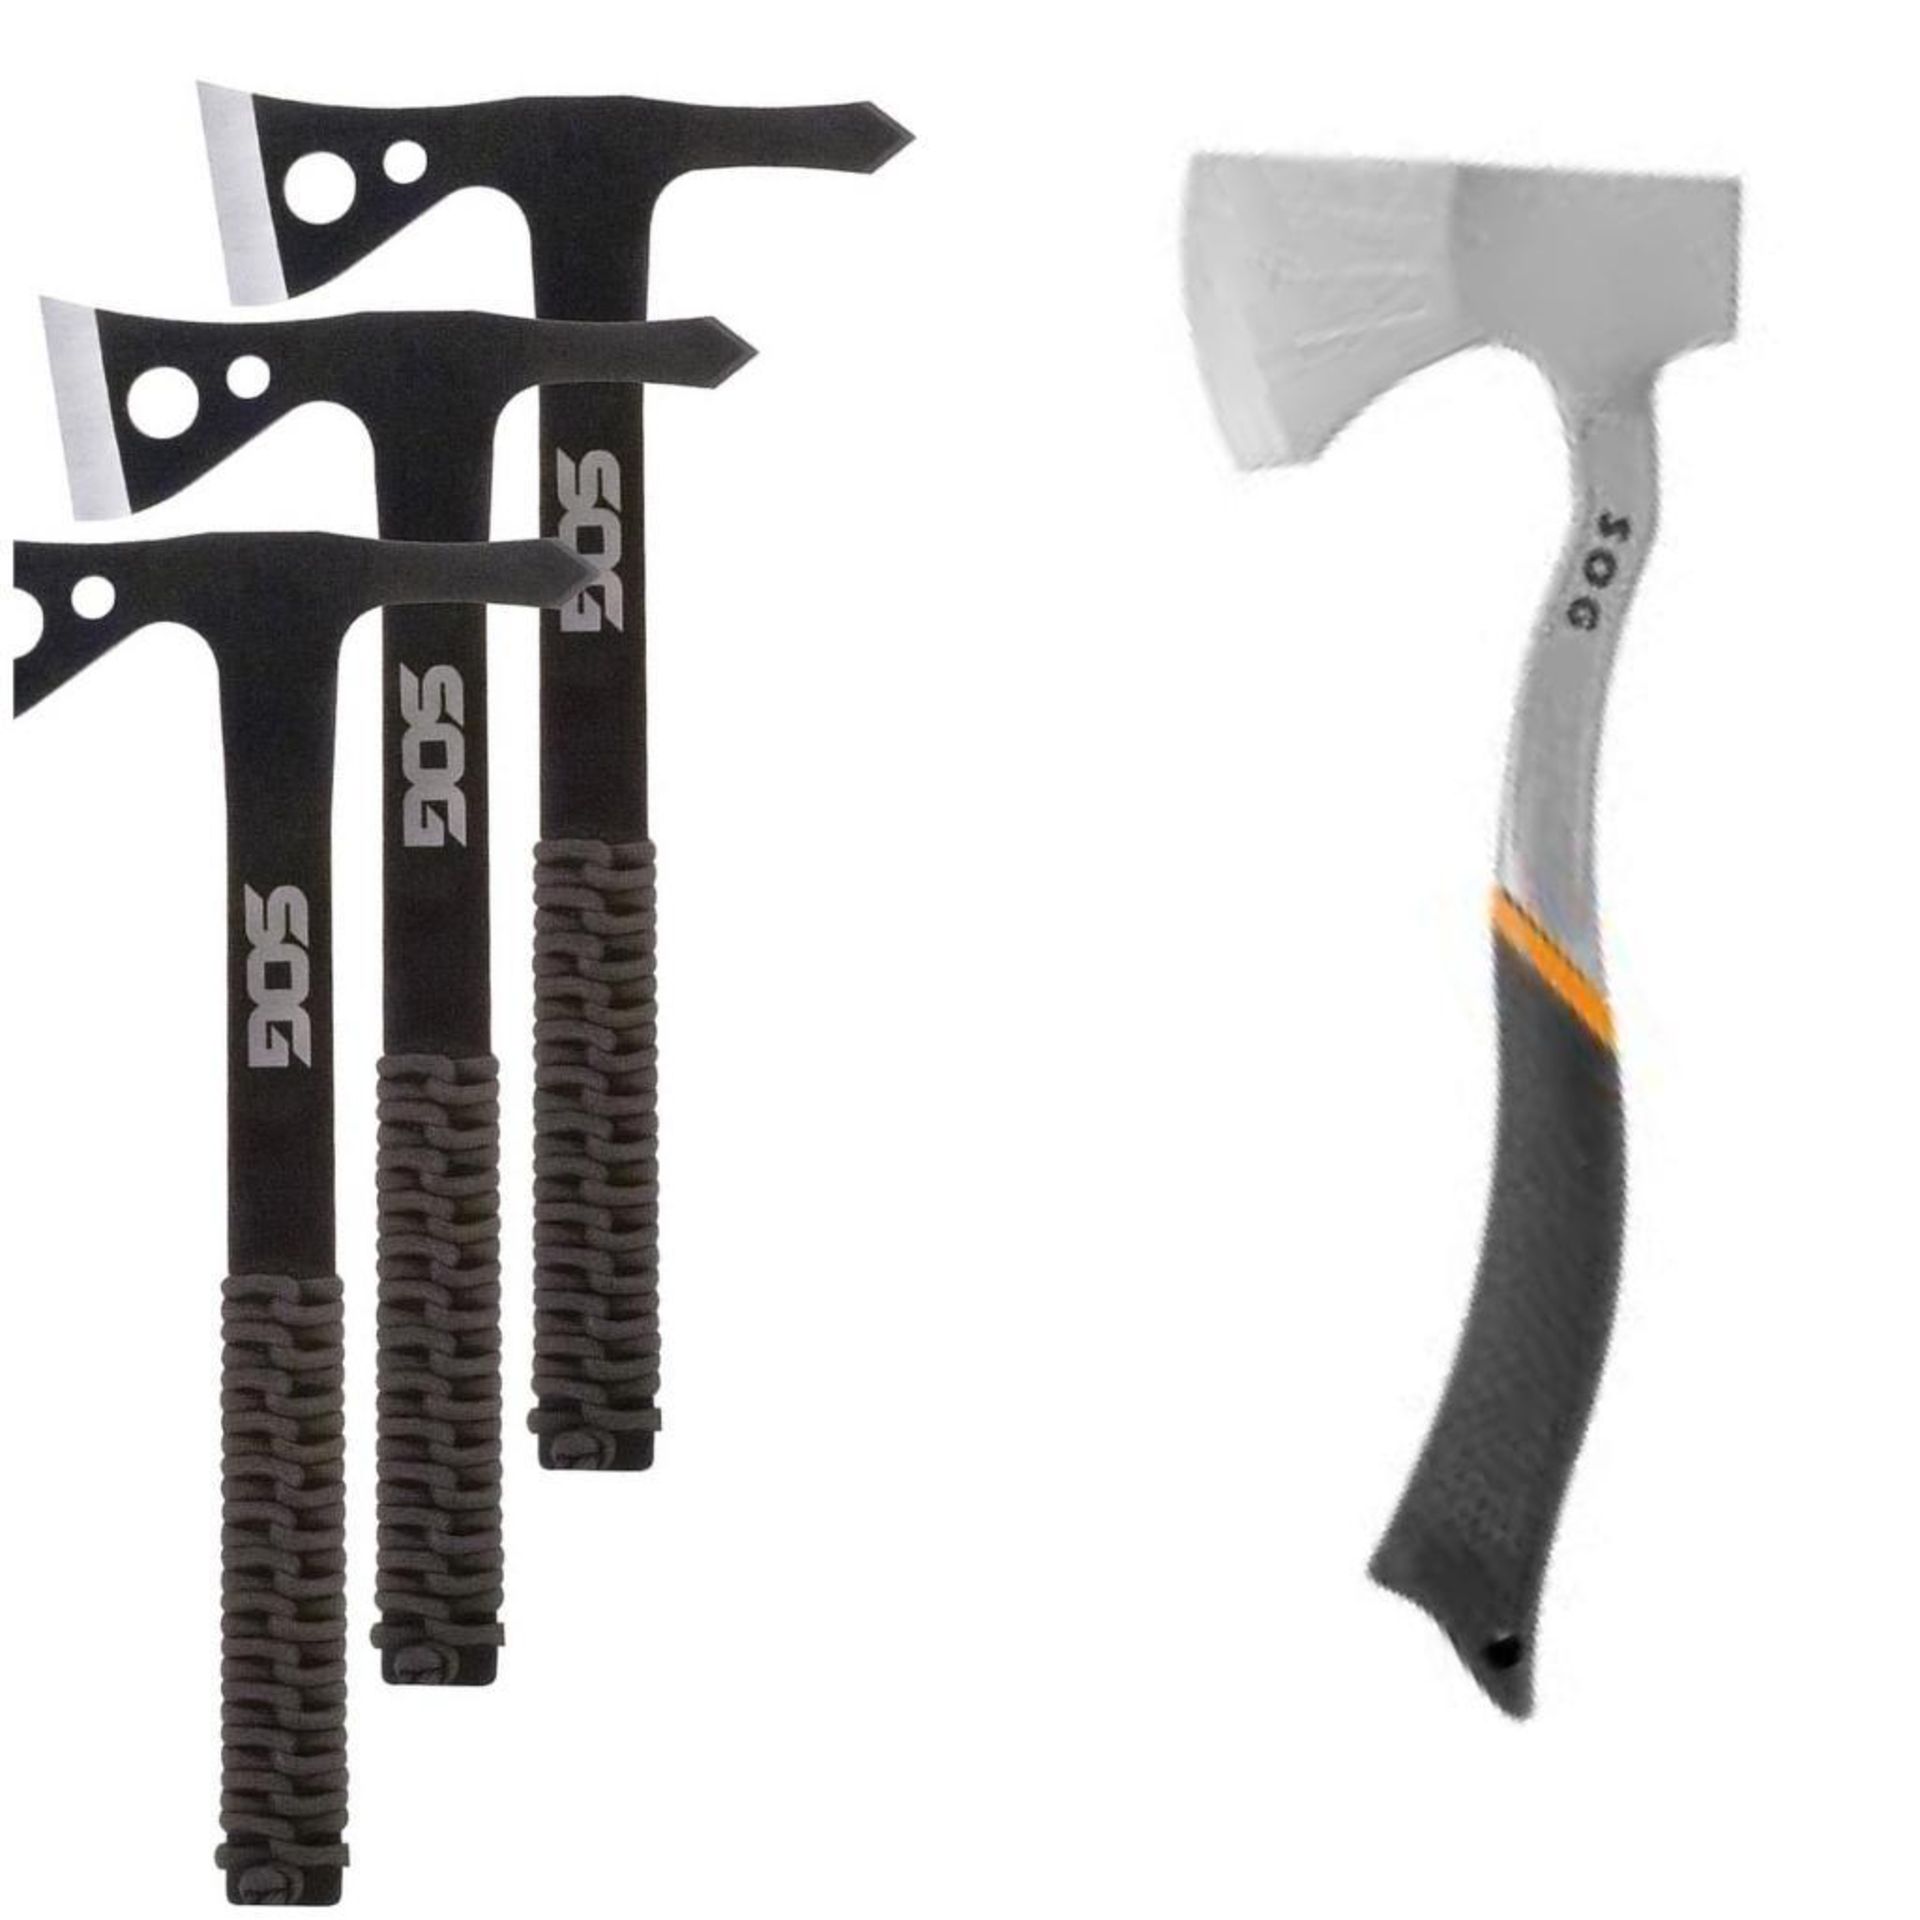 DESCRIPTION: SOG THROWING HAWKS AND SOG BASE CAMP AXE ADDITIONAL INFORMATION RETAIL VALUE $120 LOCAT